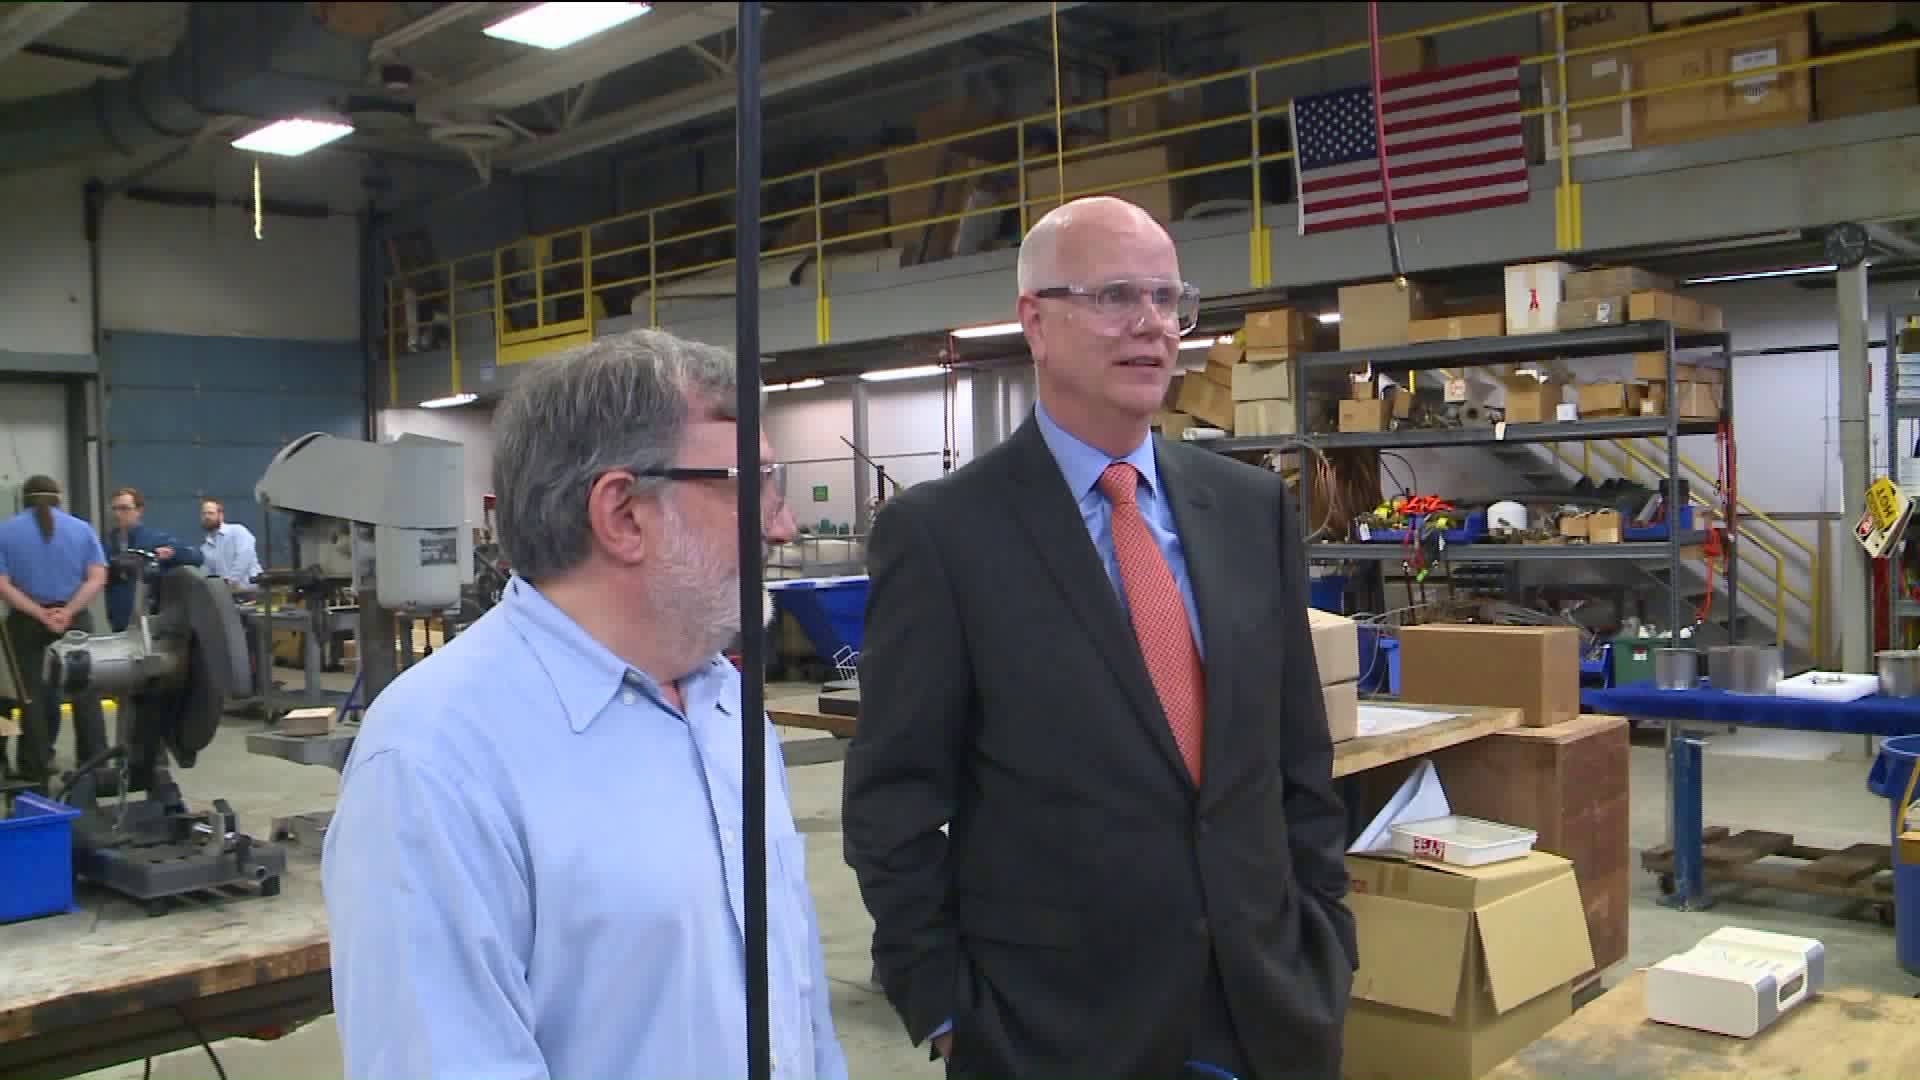 Lembo explores run for governor